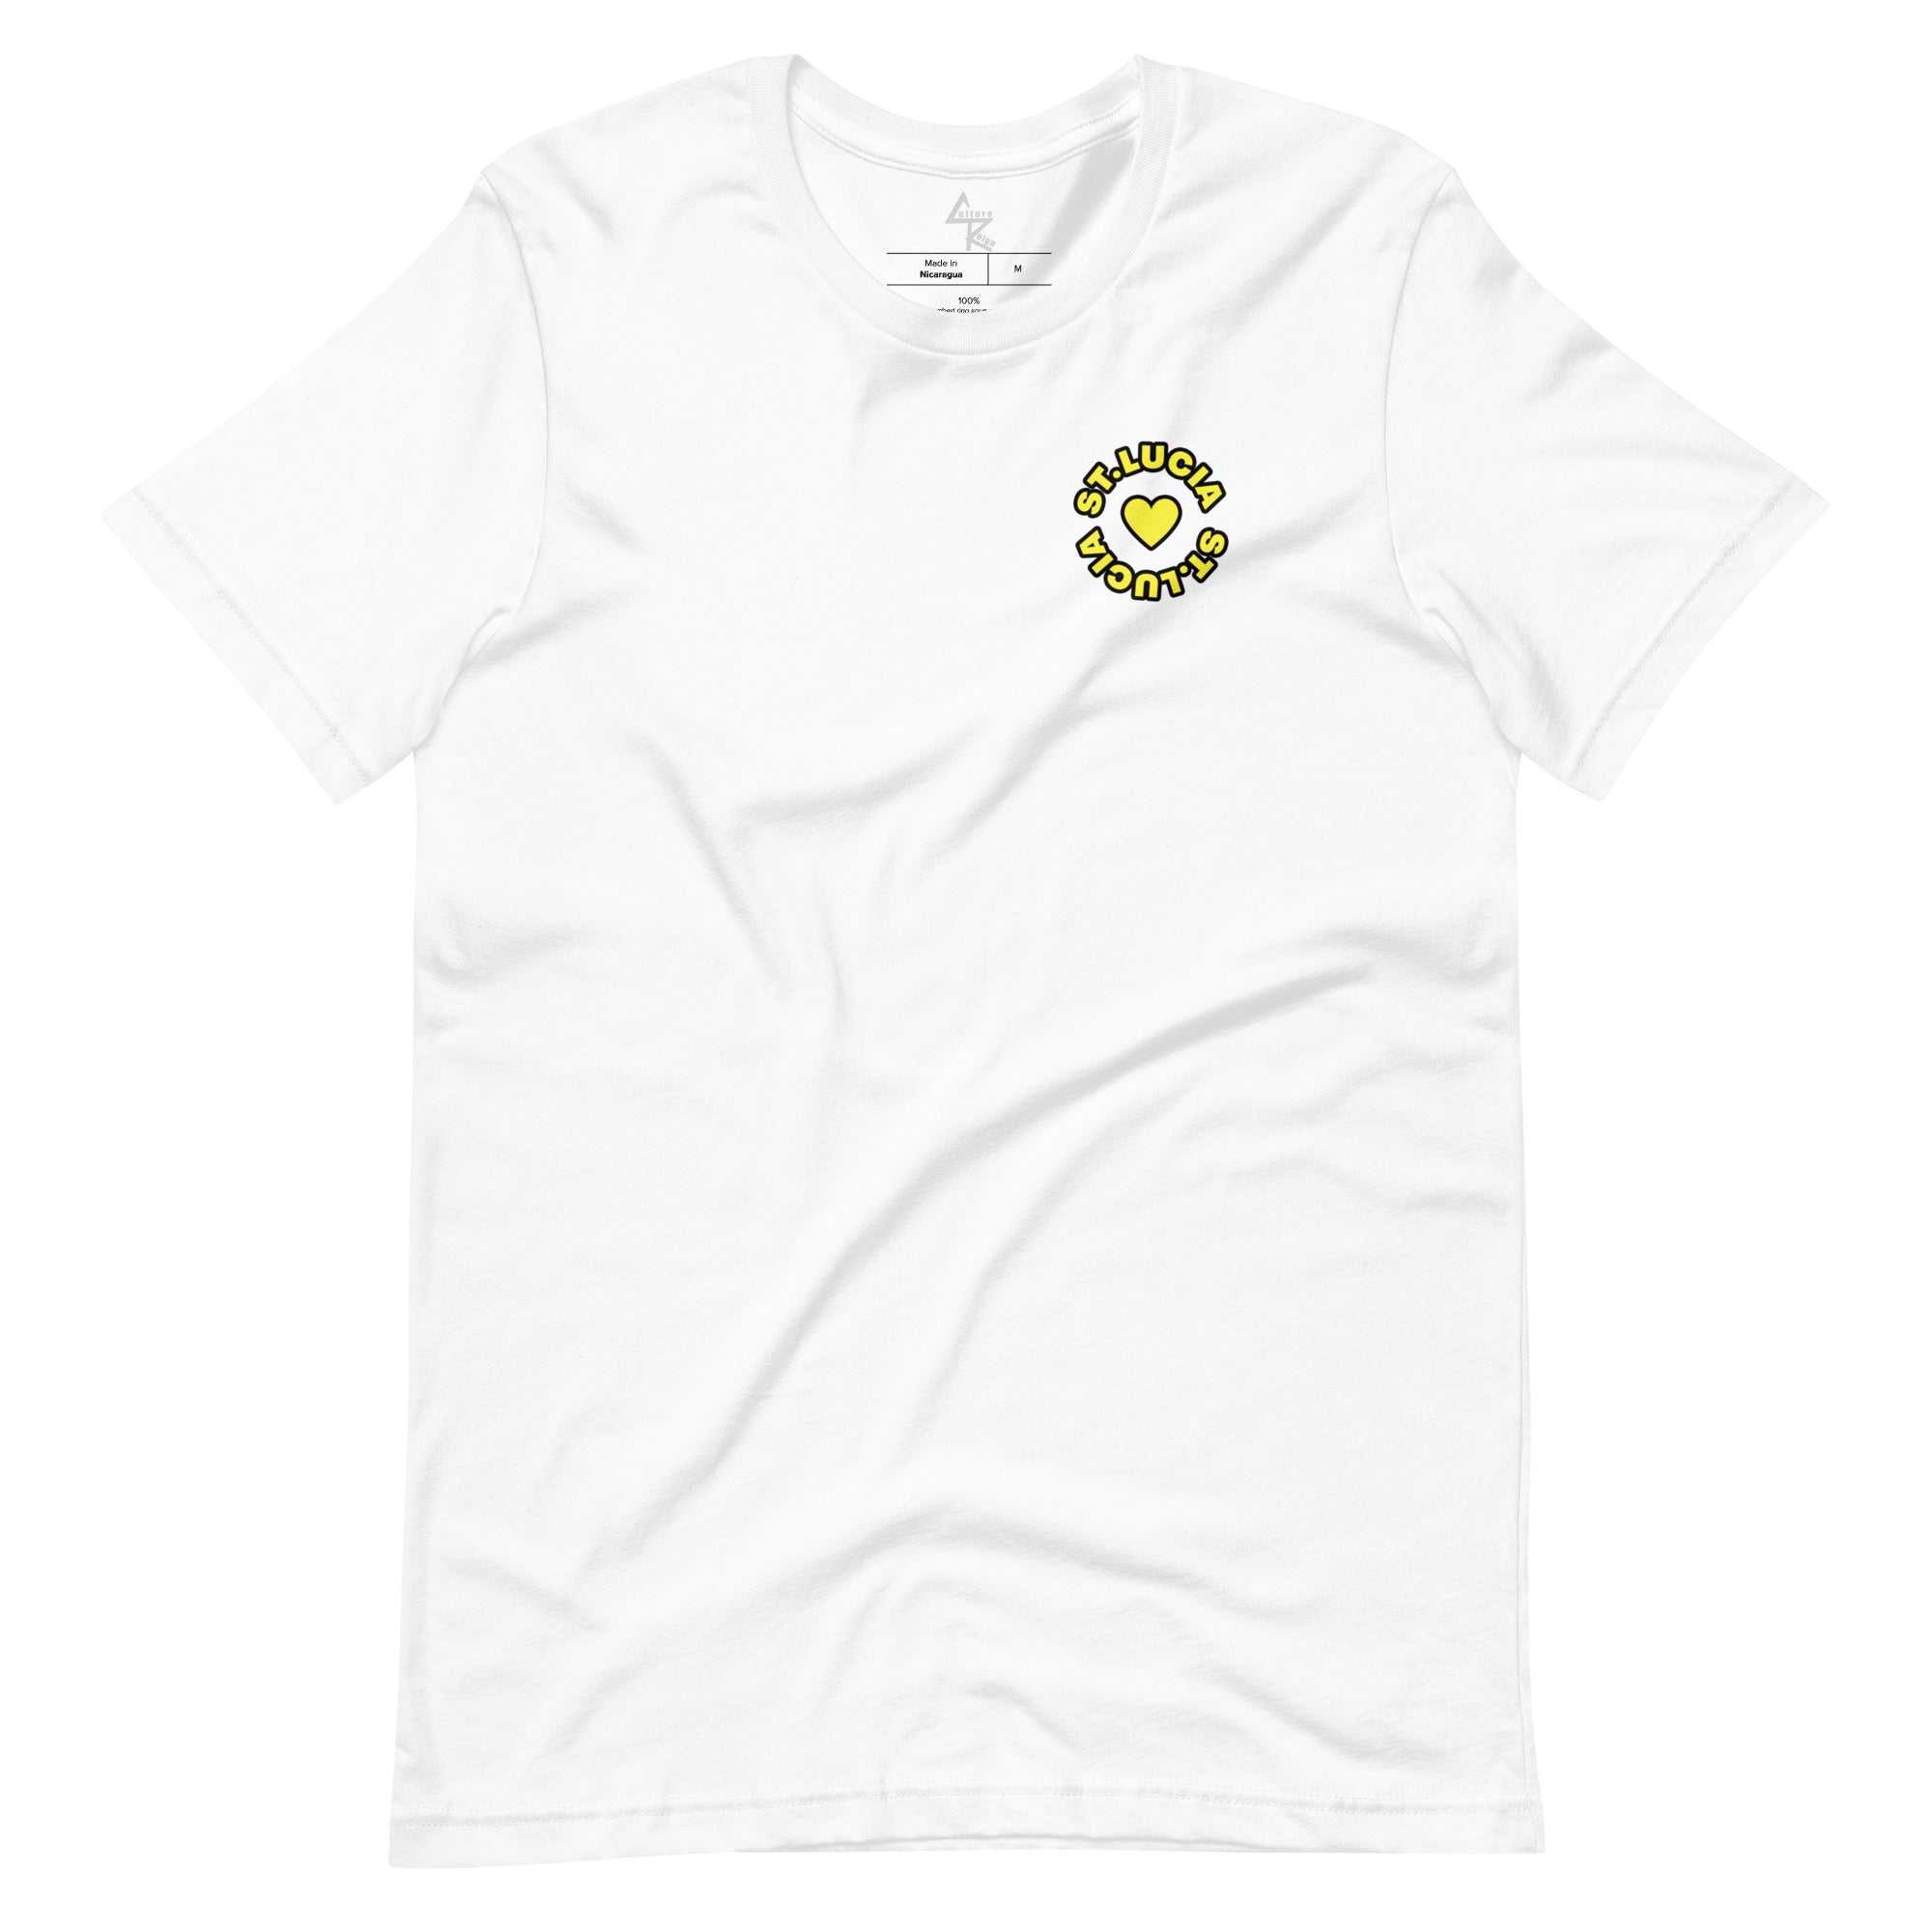 Adult Caribbean Vibes T-shirt - St. Lucia